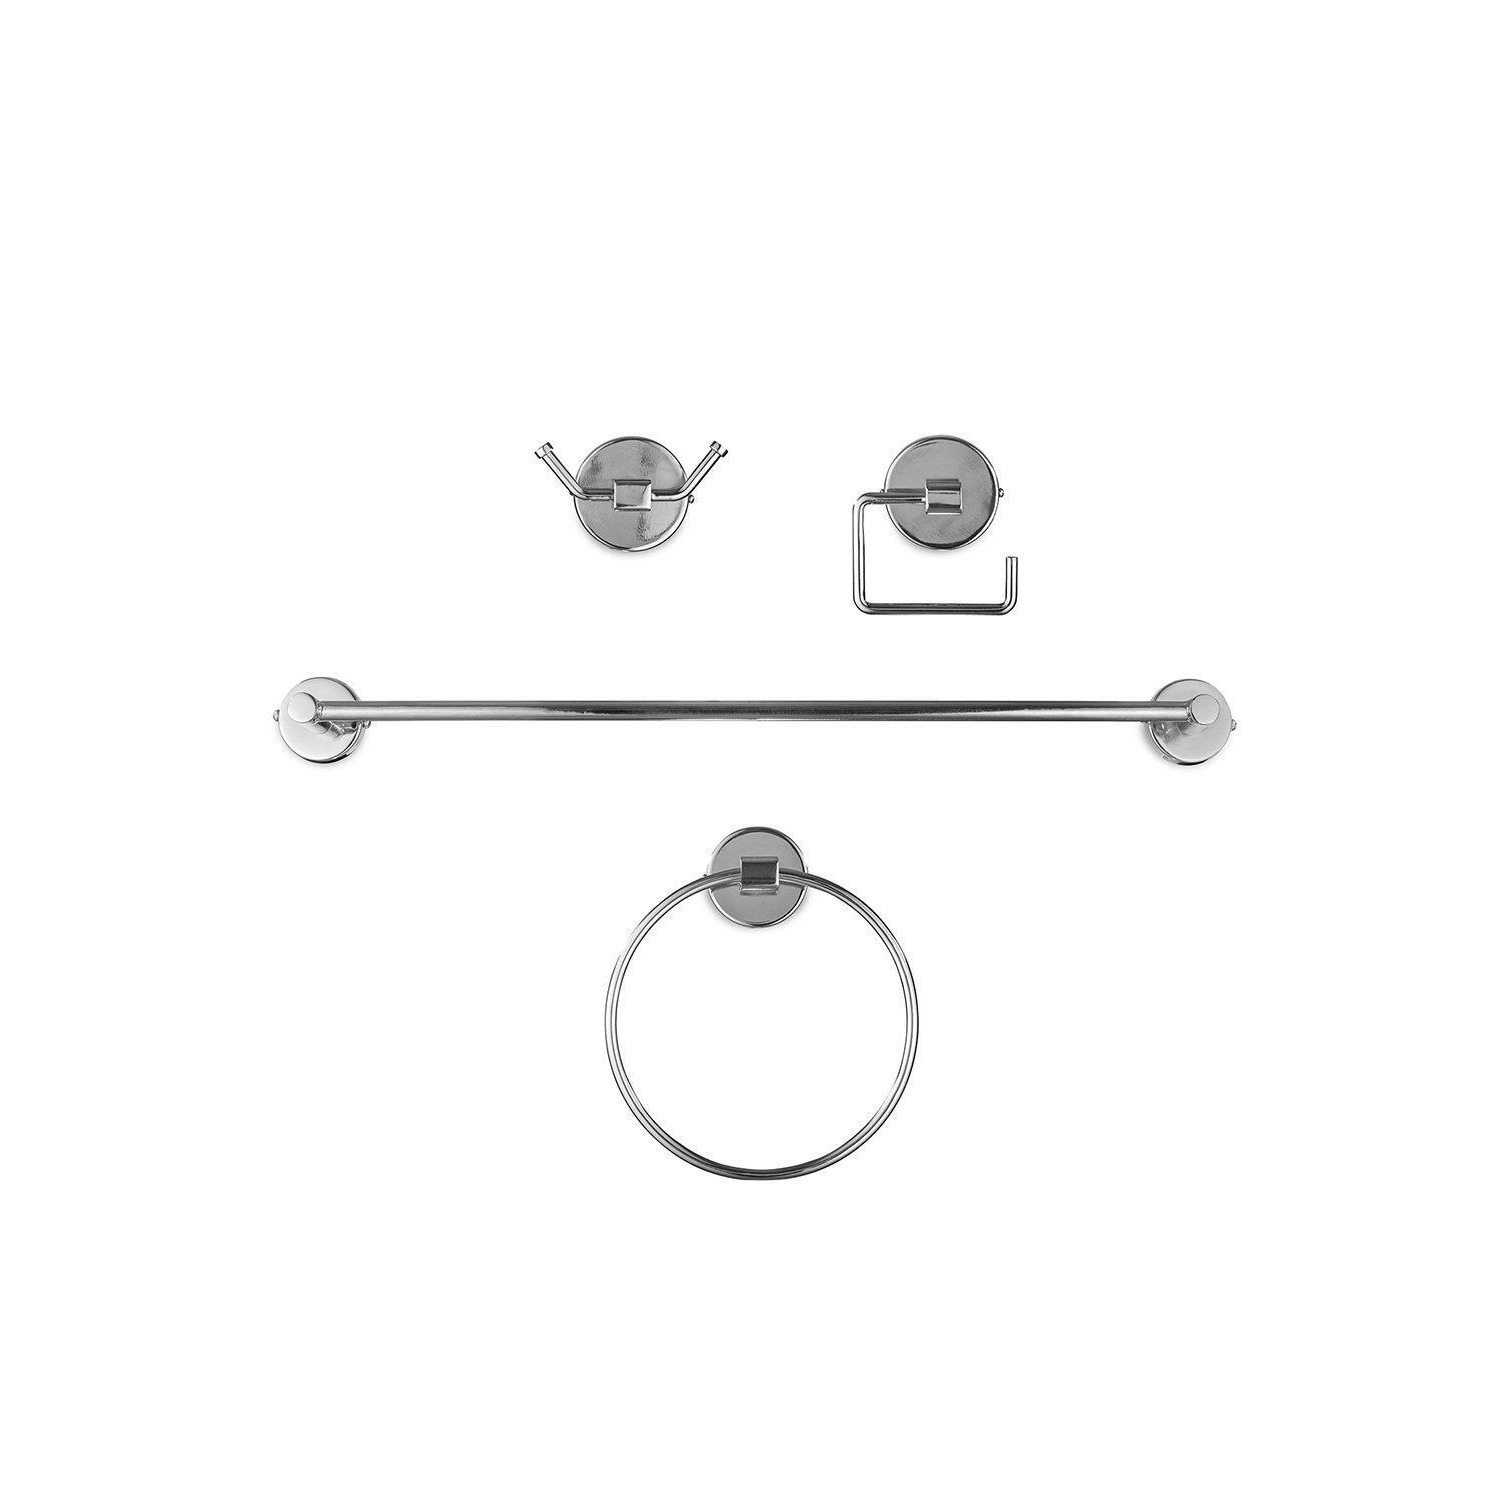 OurHouse 4pc Fittings Chrome - image 1